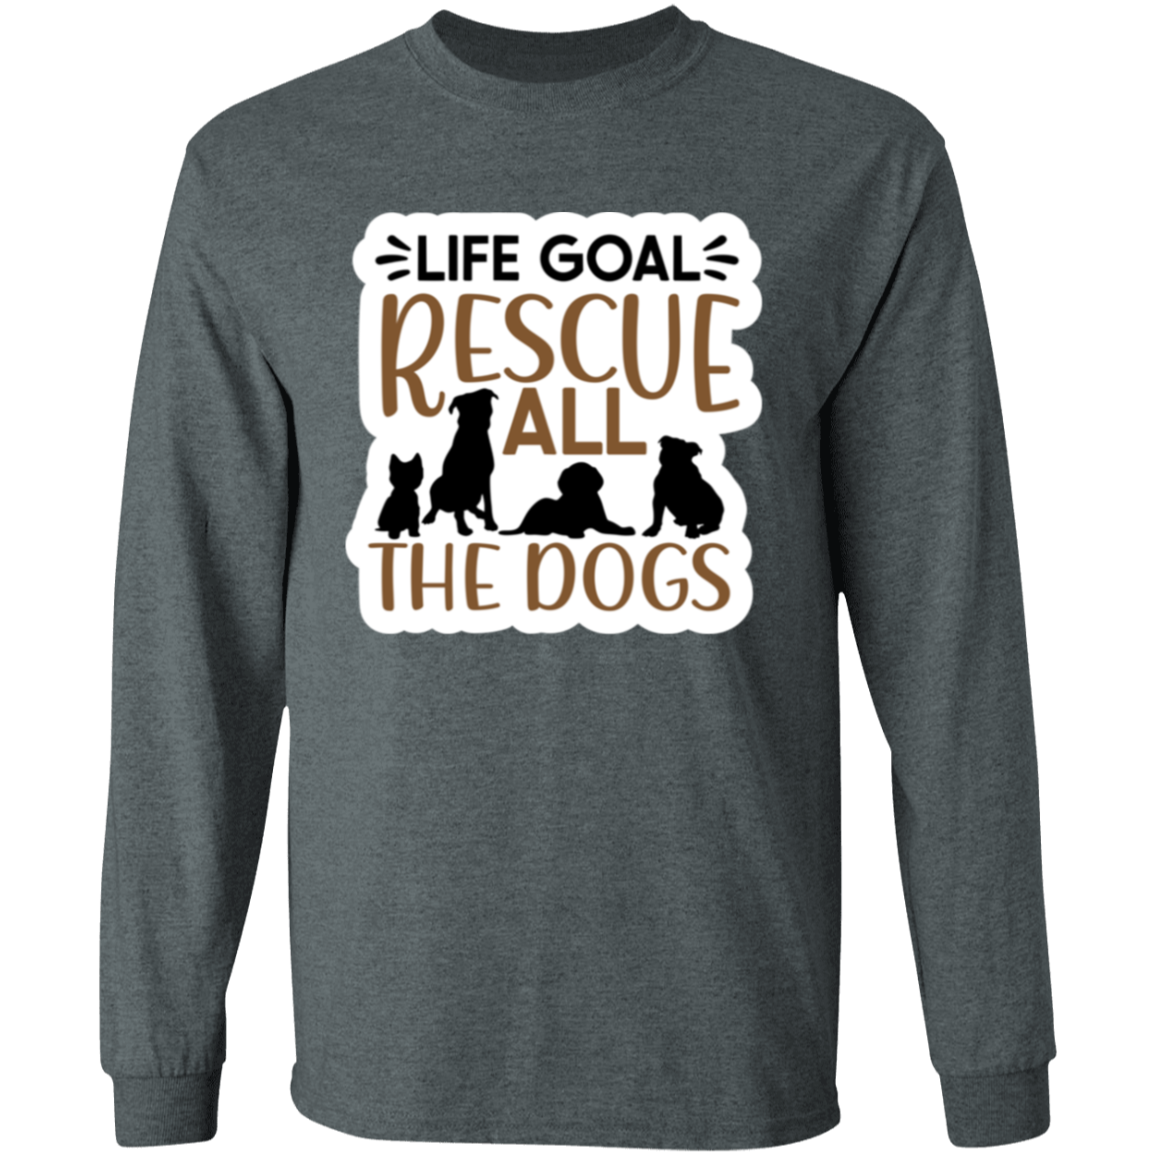 Life Goal Rescue All the Dogs Long Sleeve T-Shirt